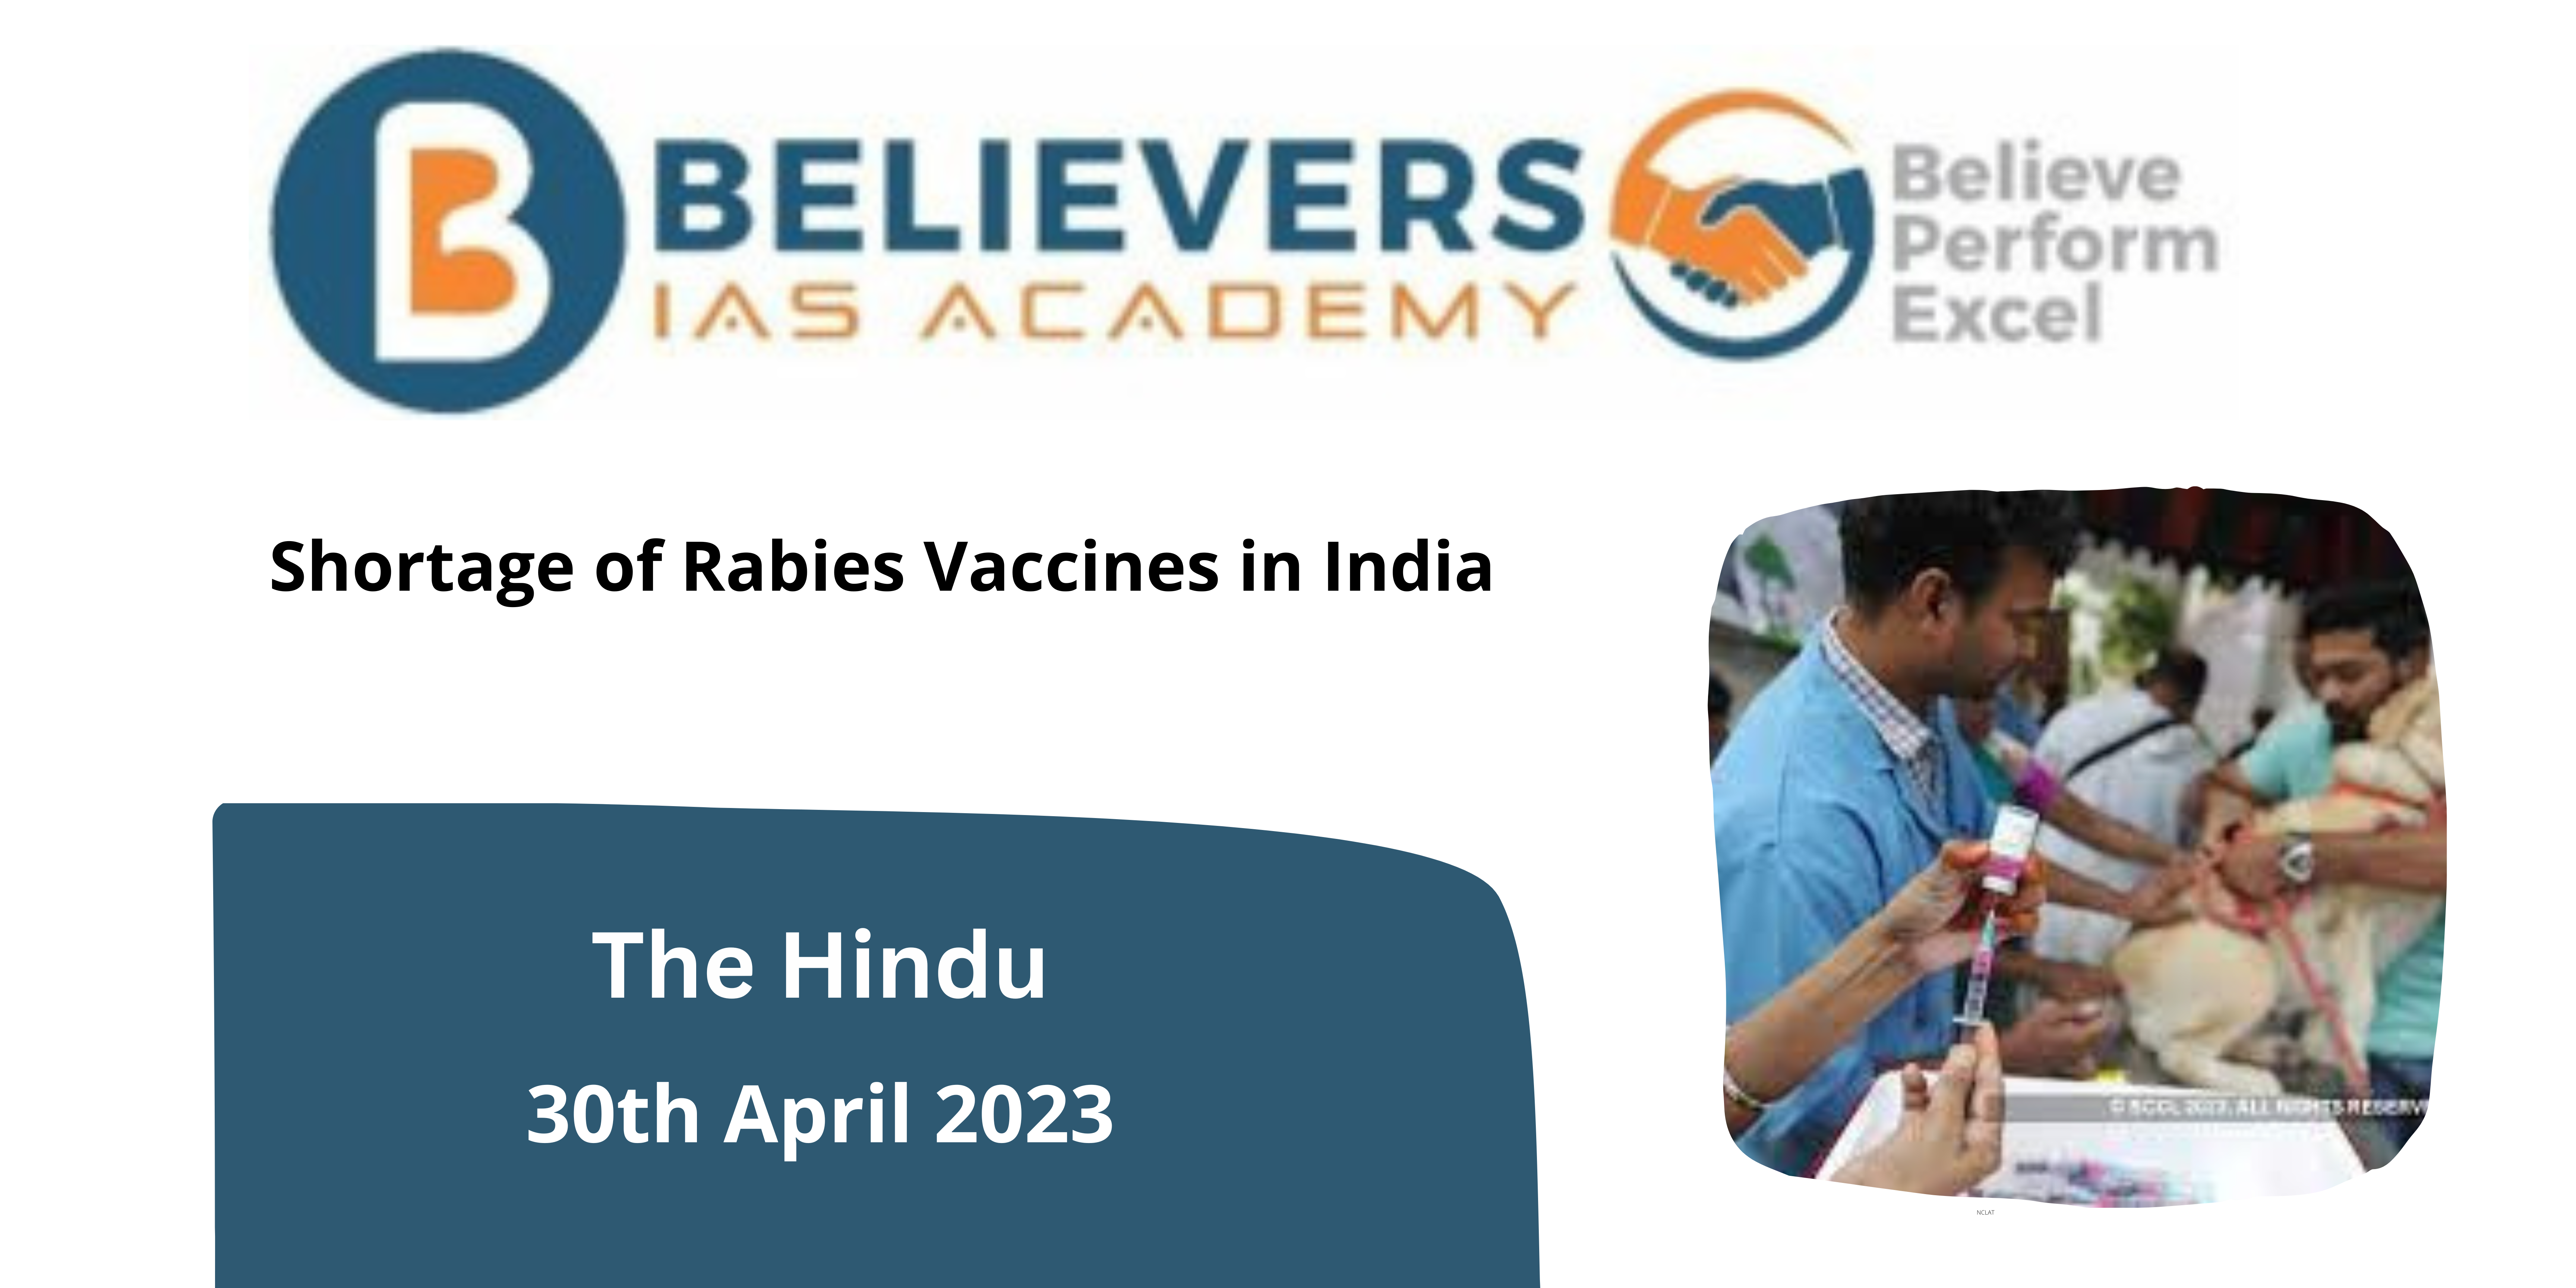 Shortage of Rabies Vaccines in India